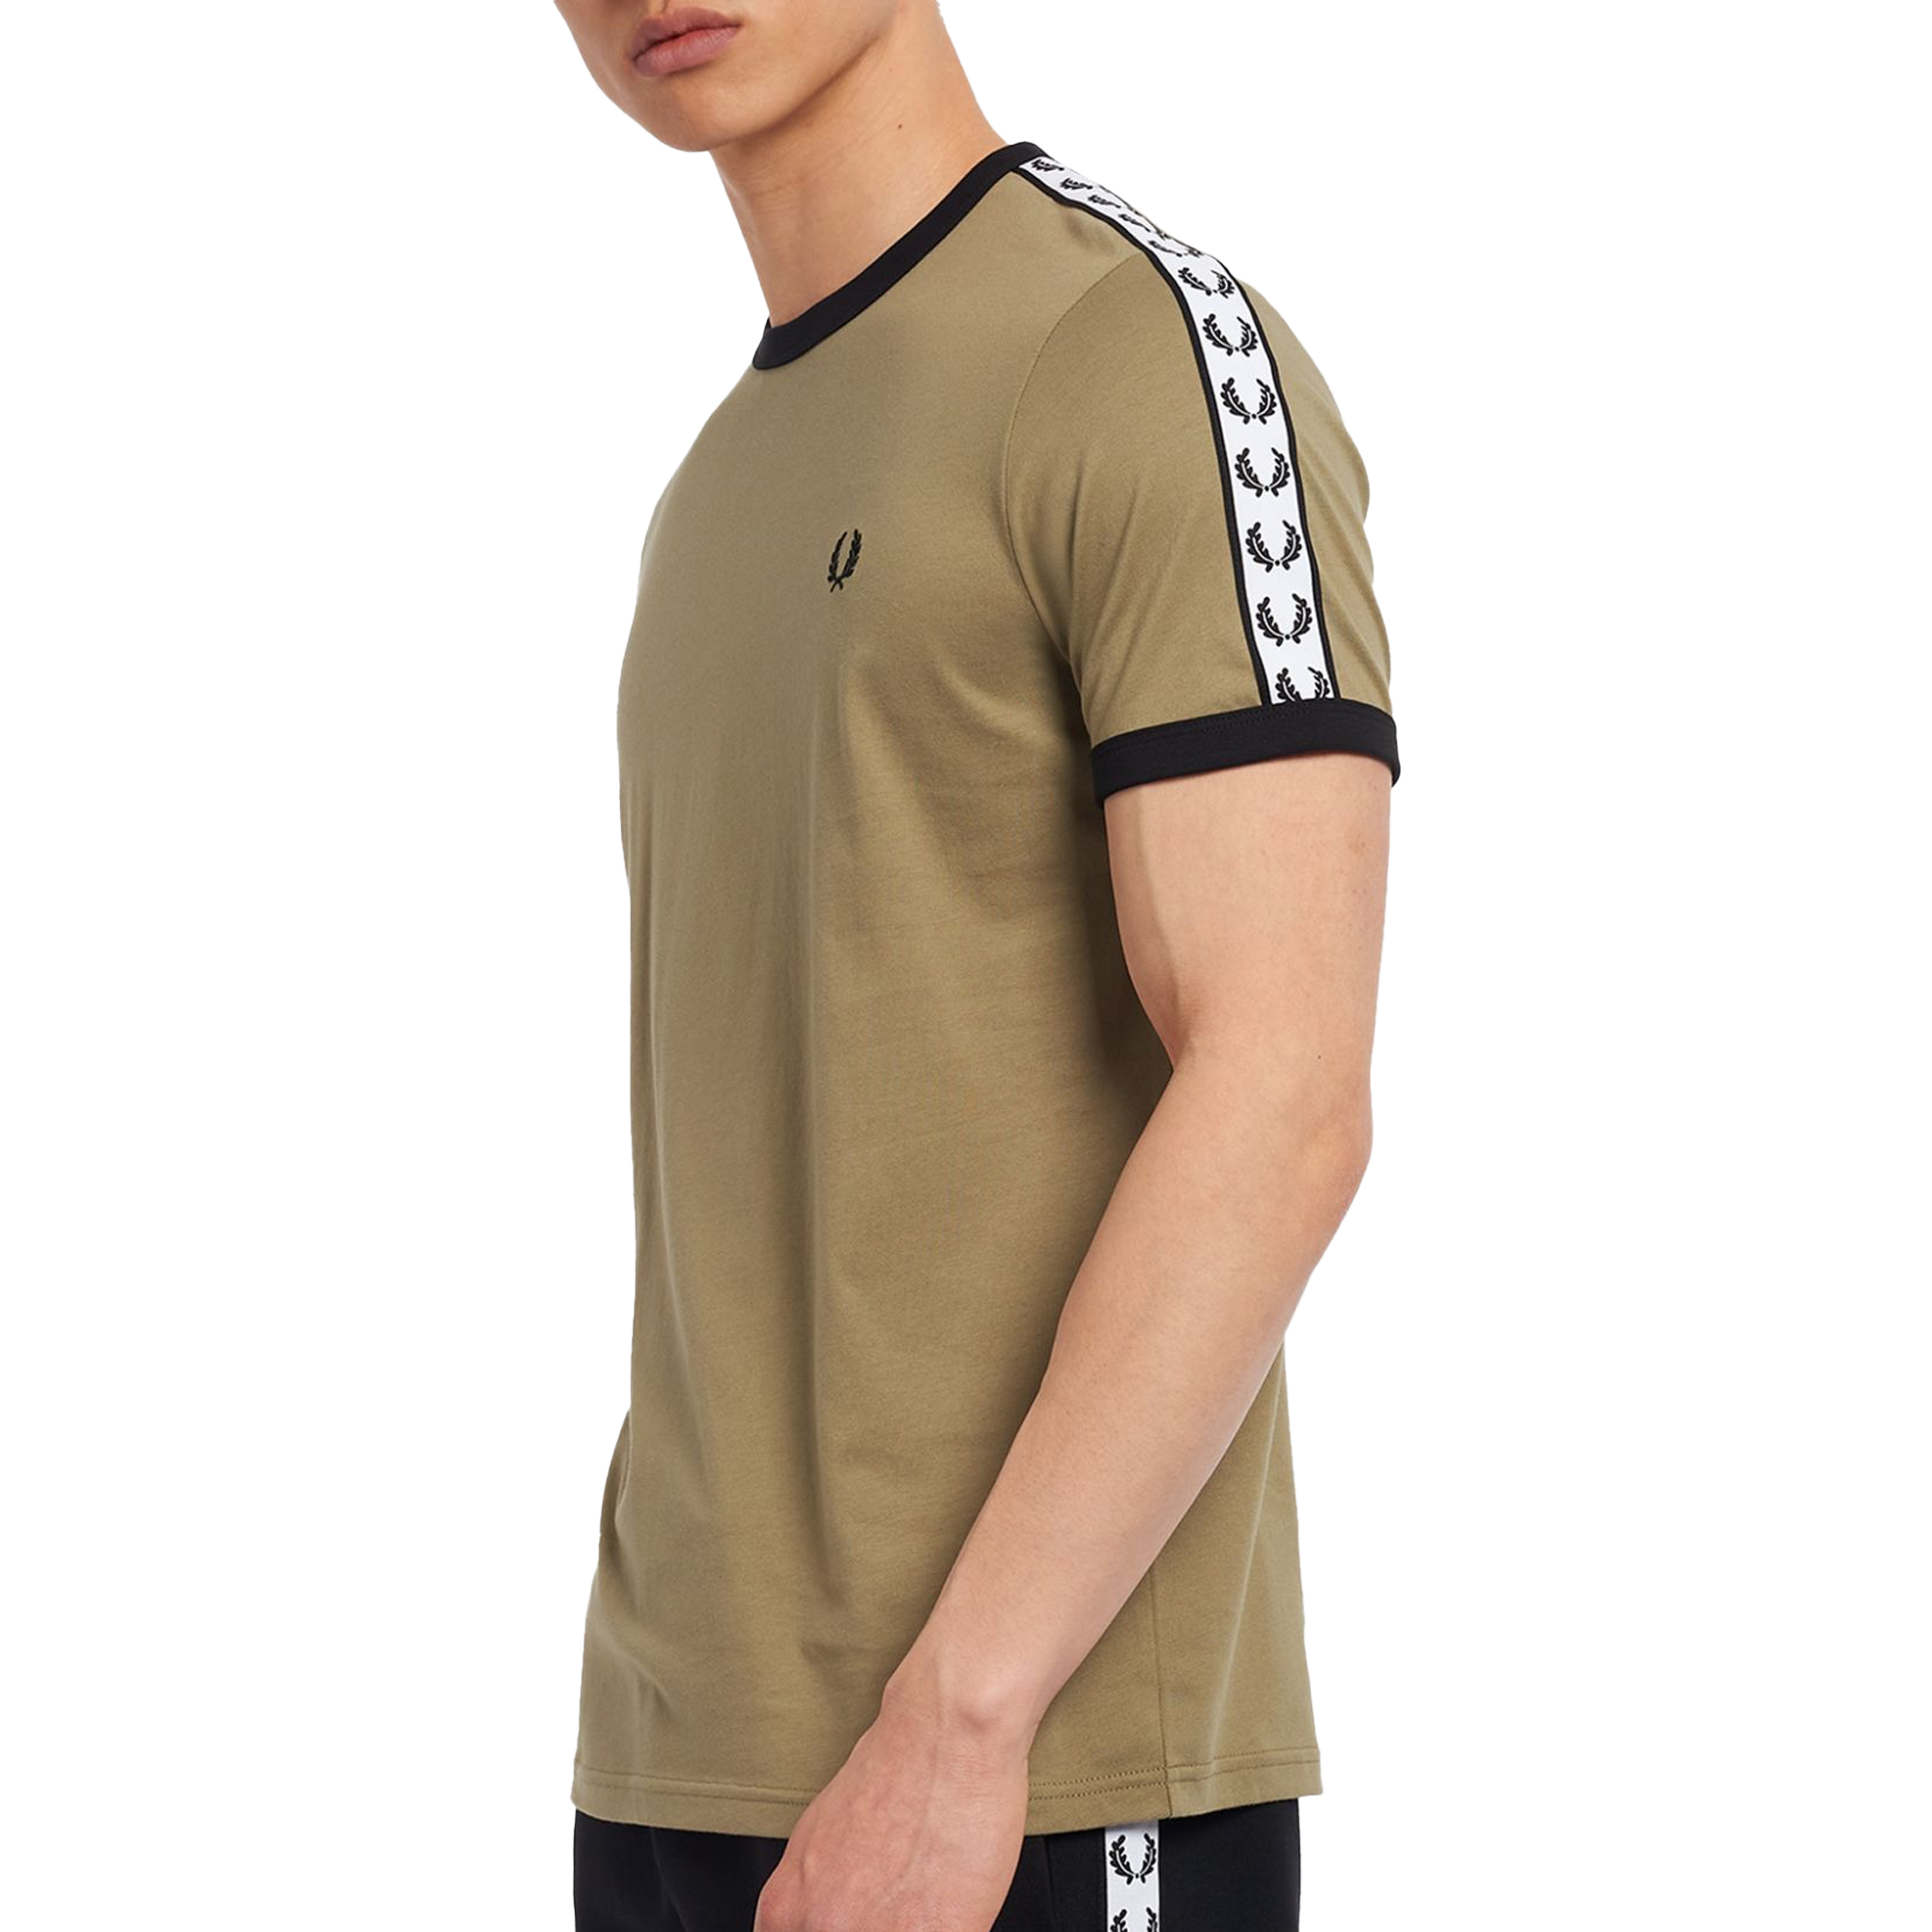 T-shirt Fred Perry Taped Ringer